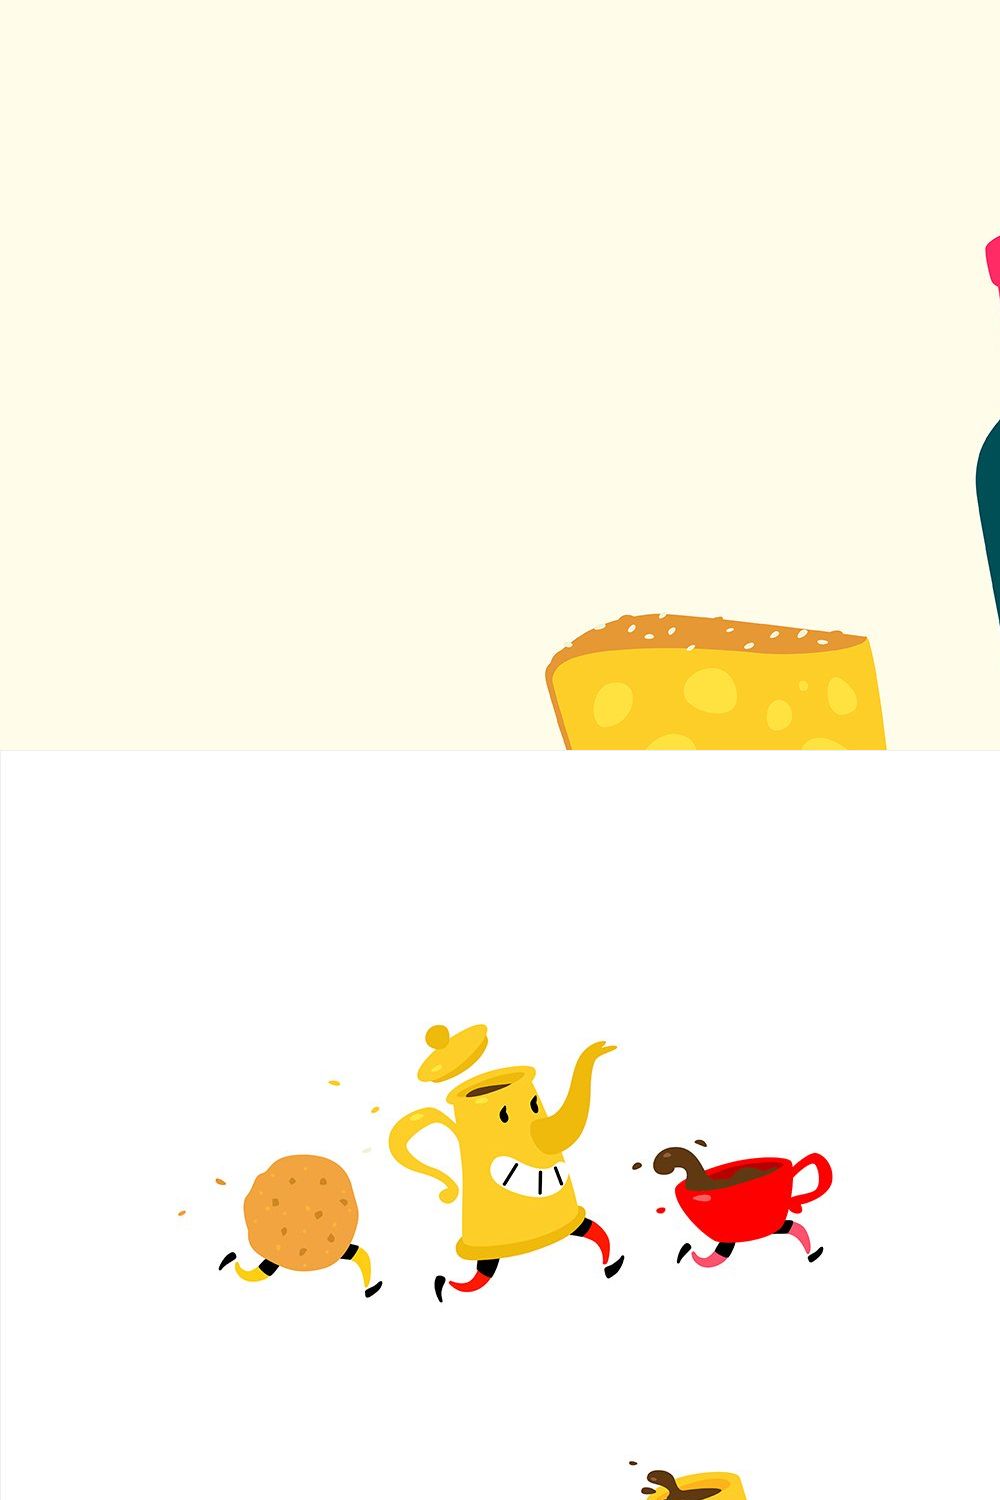 Bottle of wine and cheese) pinterest preview image.